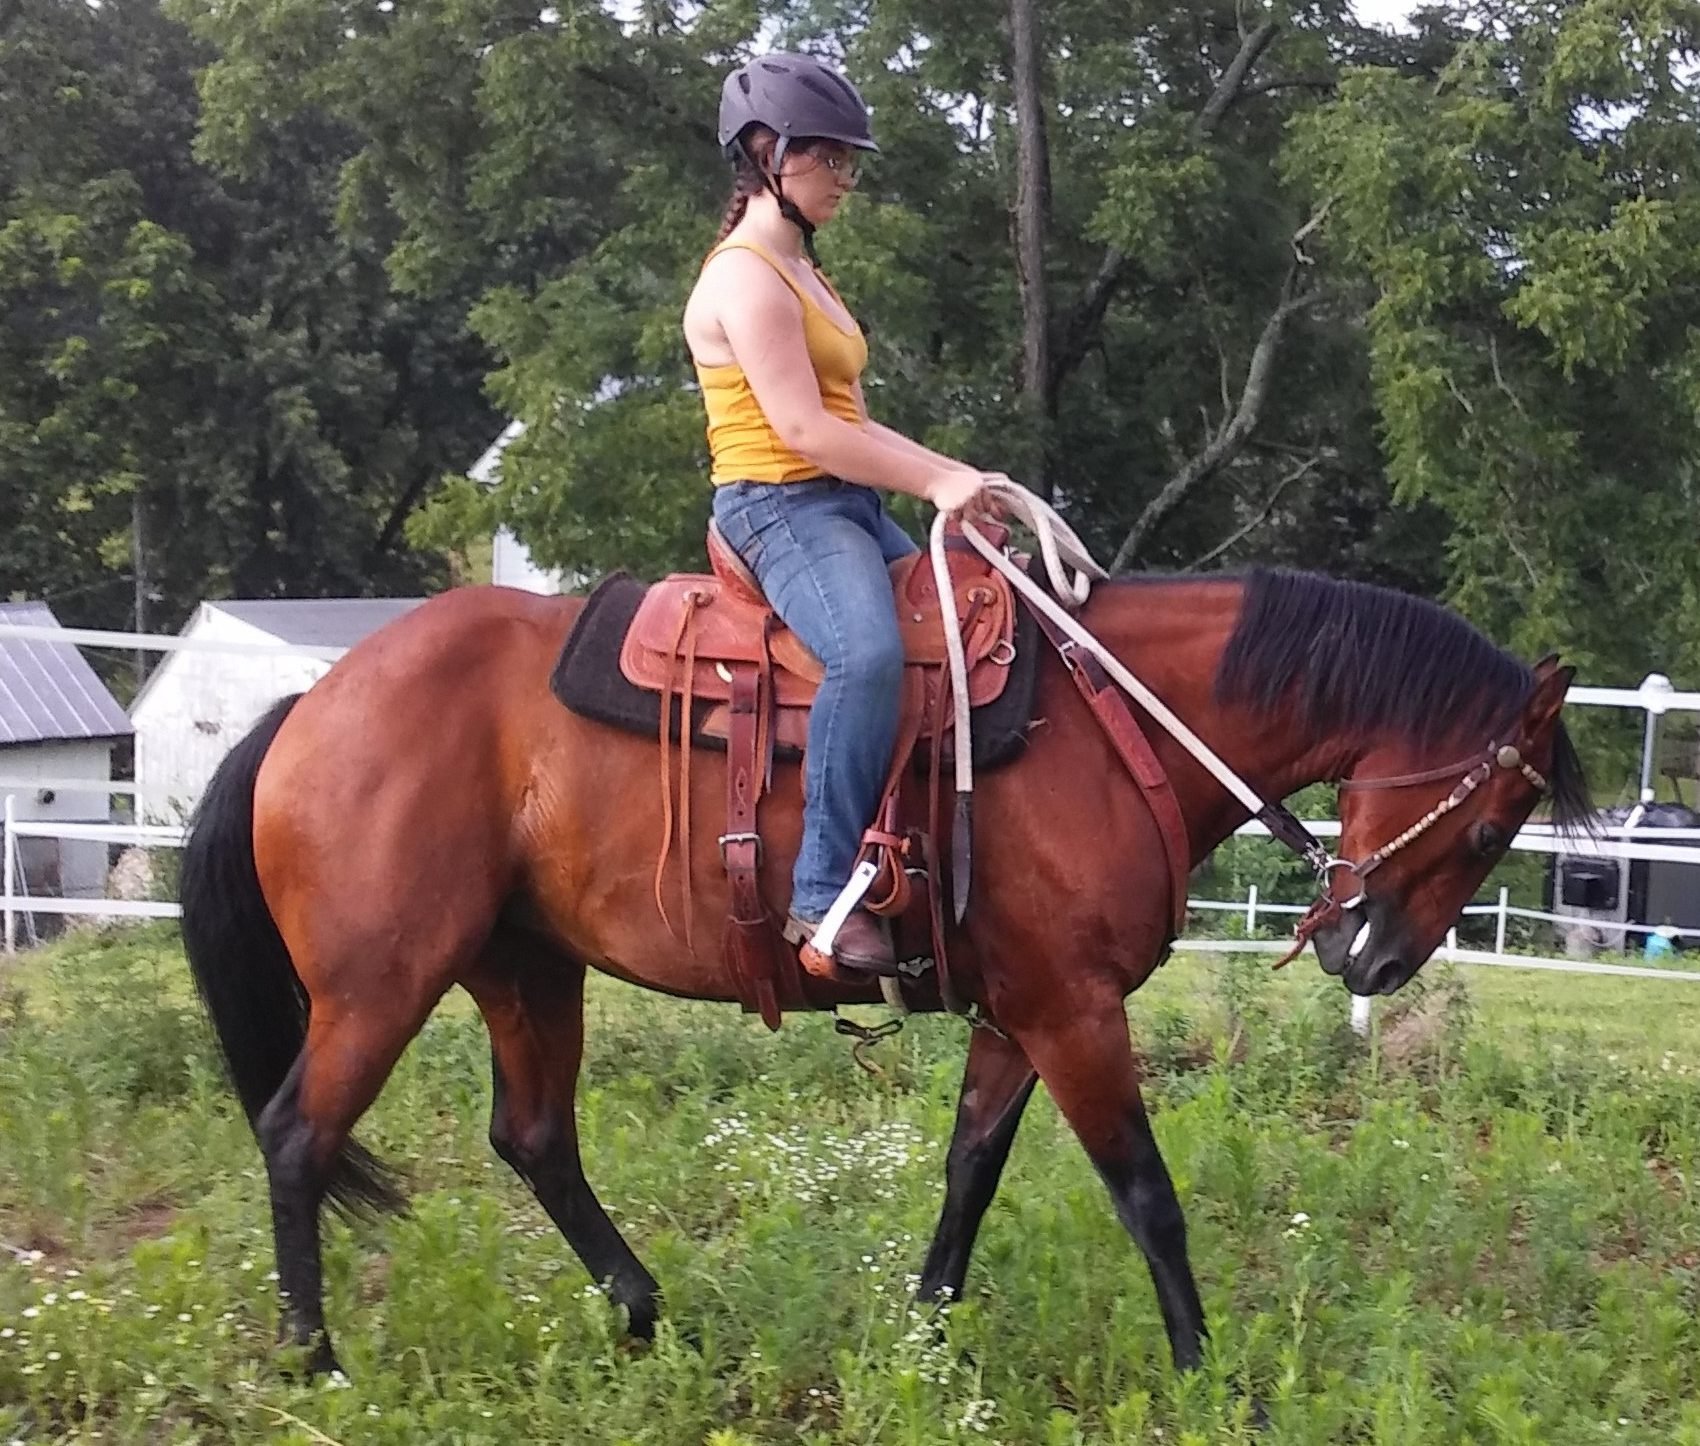 Dealing with Chronic Illness as an Equestrian